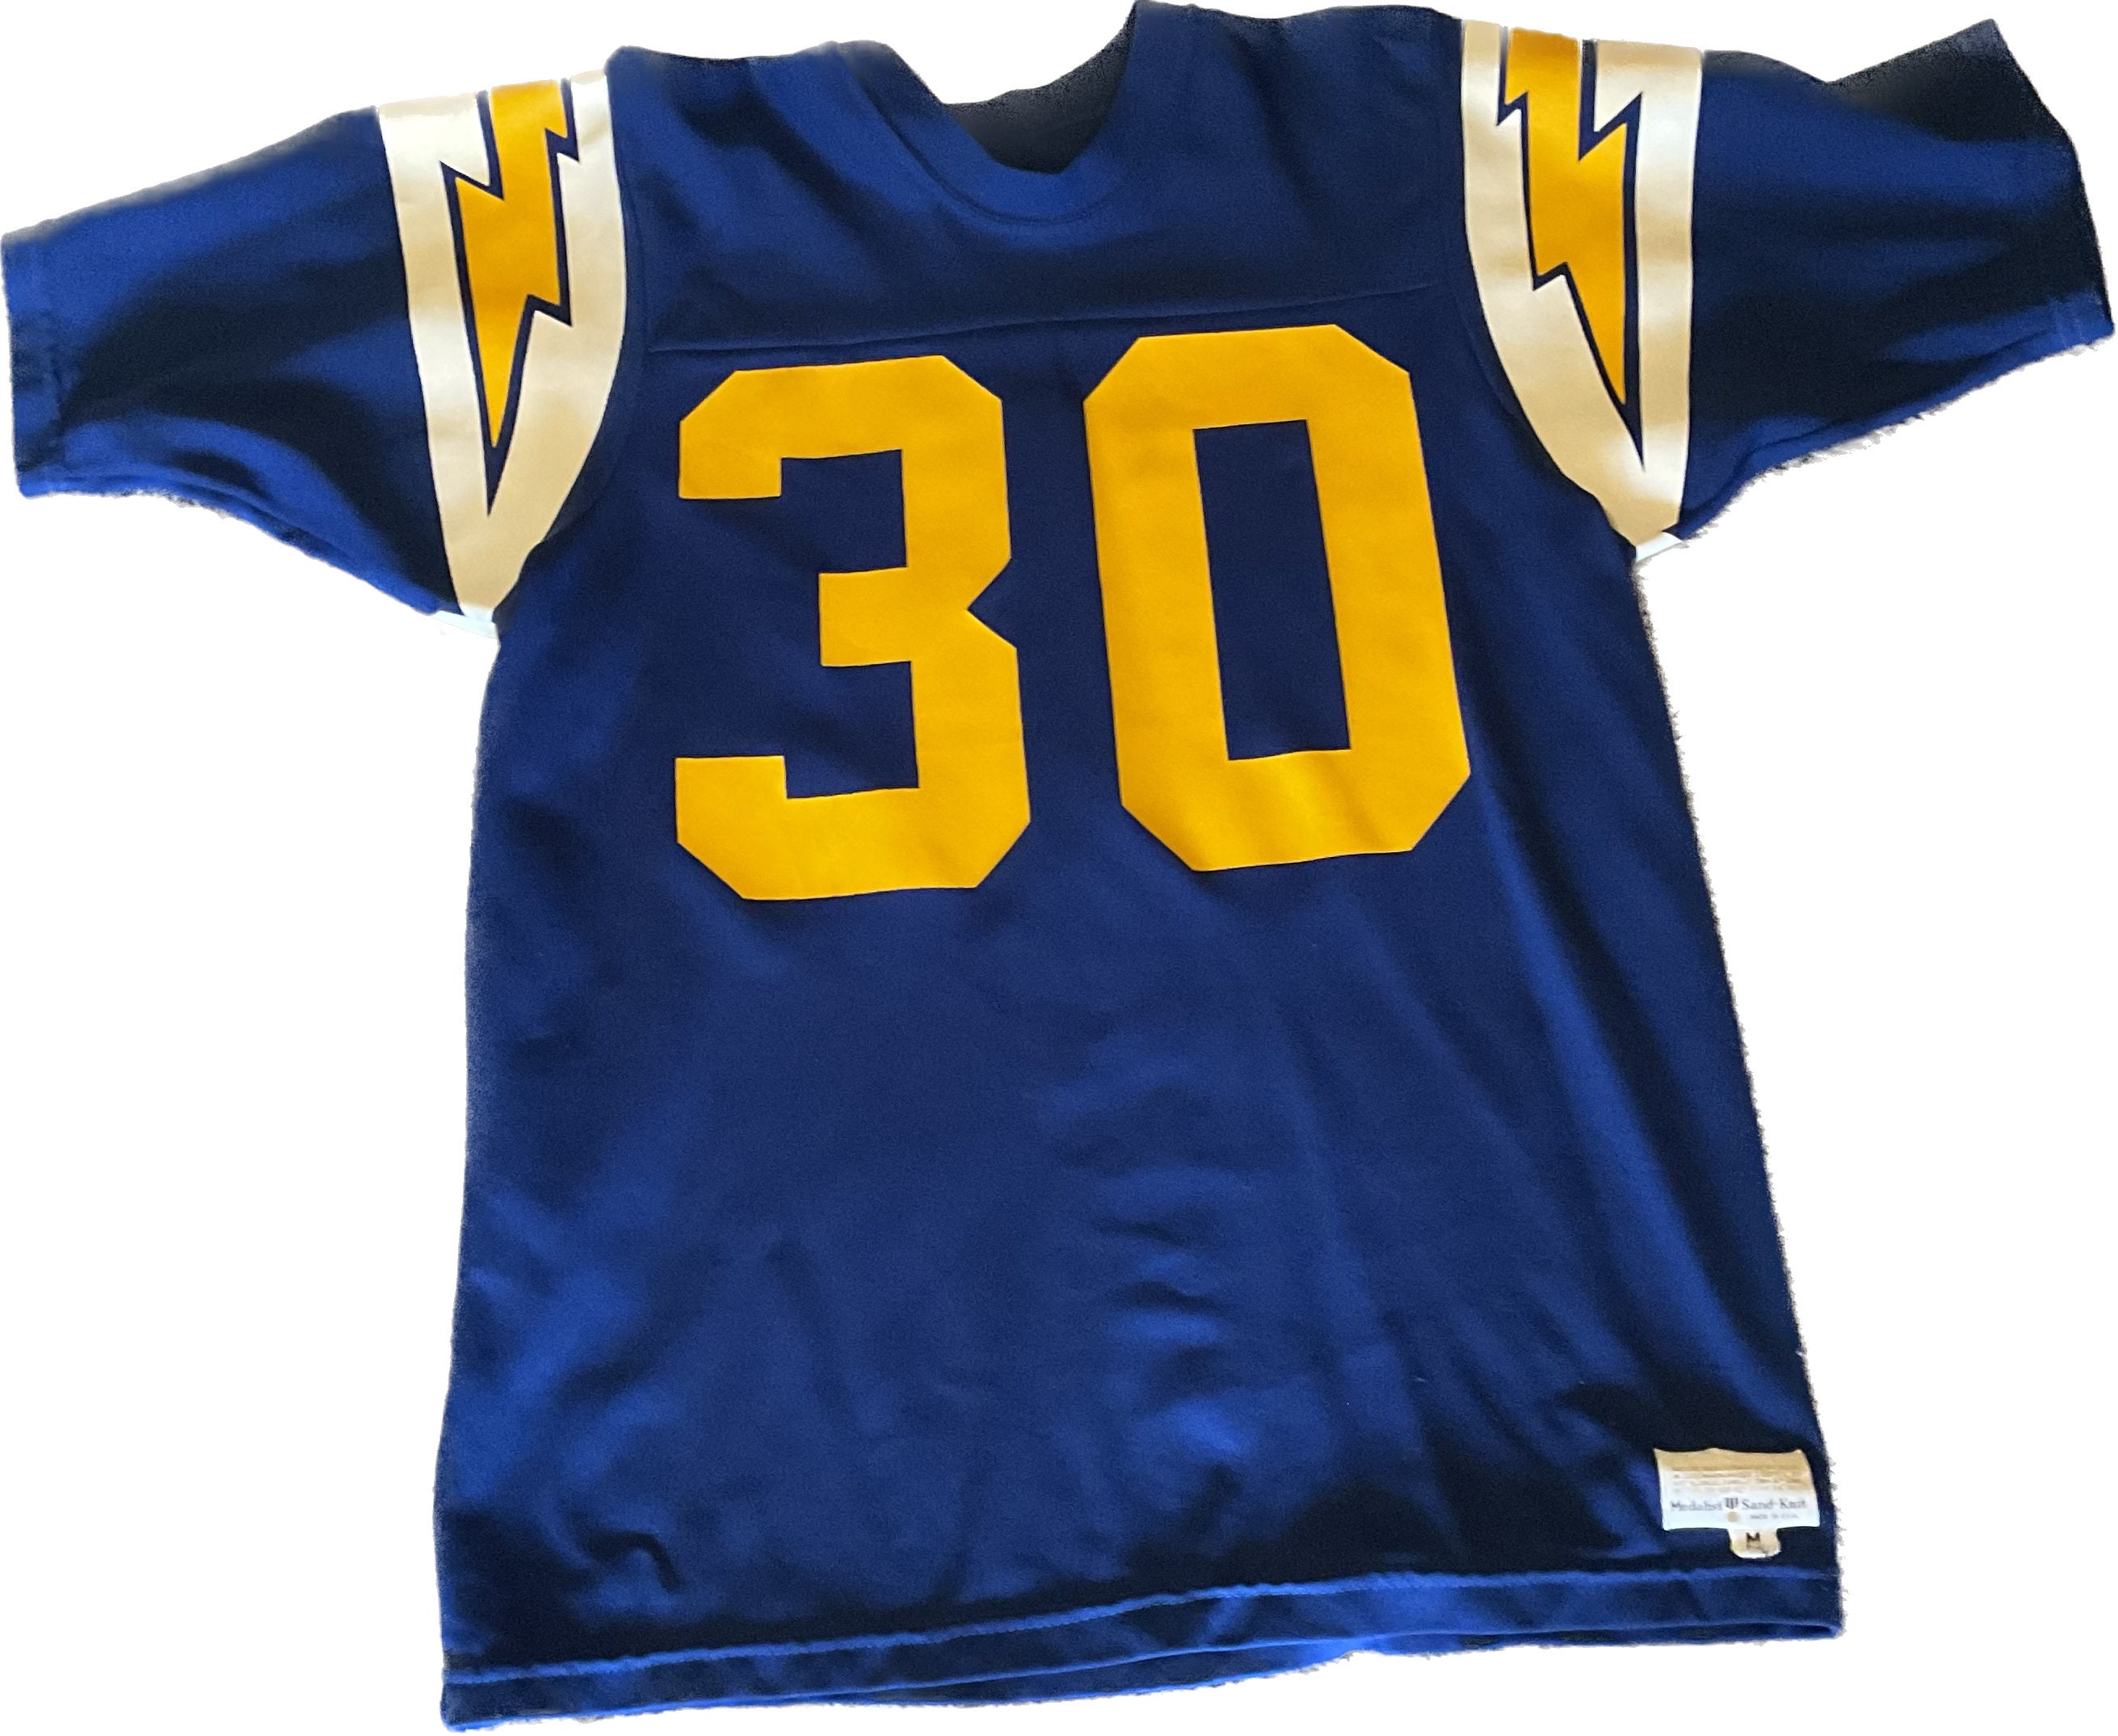 Personalized LA Chargers Baseball Jersey Exciting Los Angeles Chargers  Gifts - Personalized Gifts: Family, Sports, Occasions, Trending